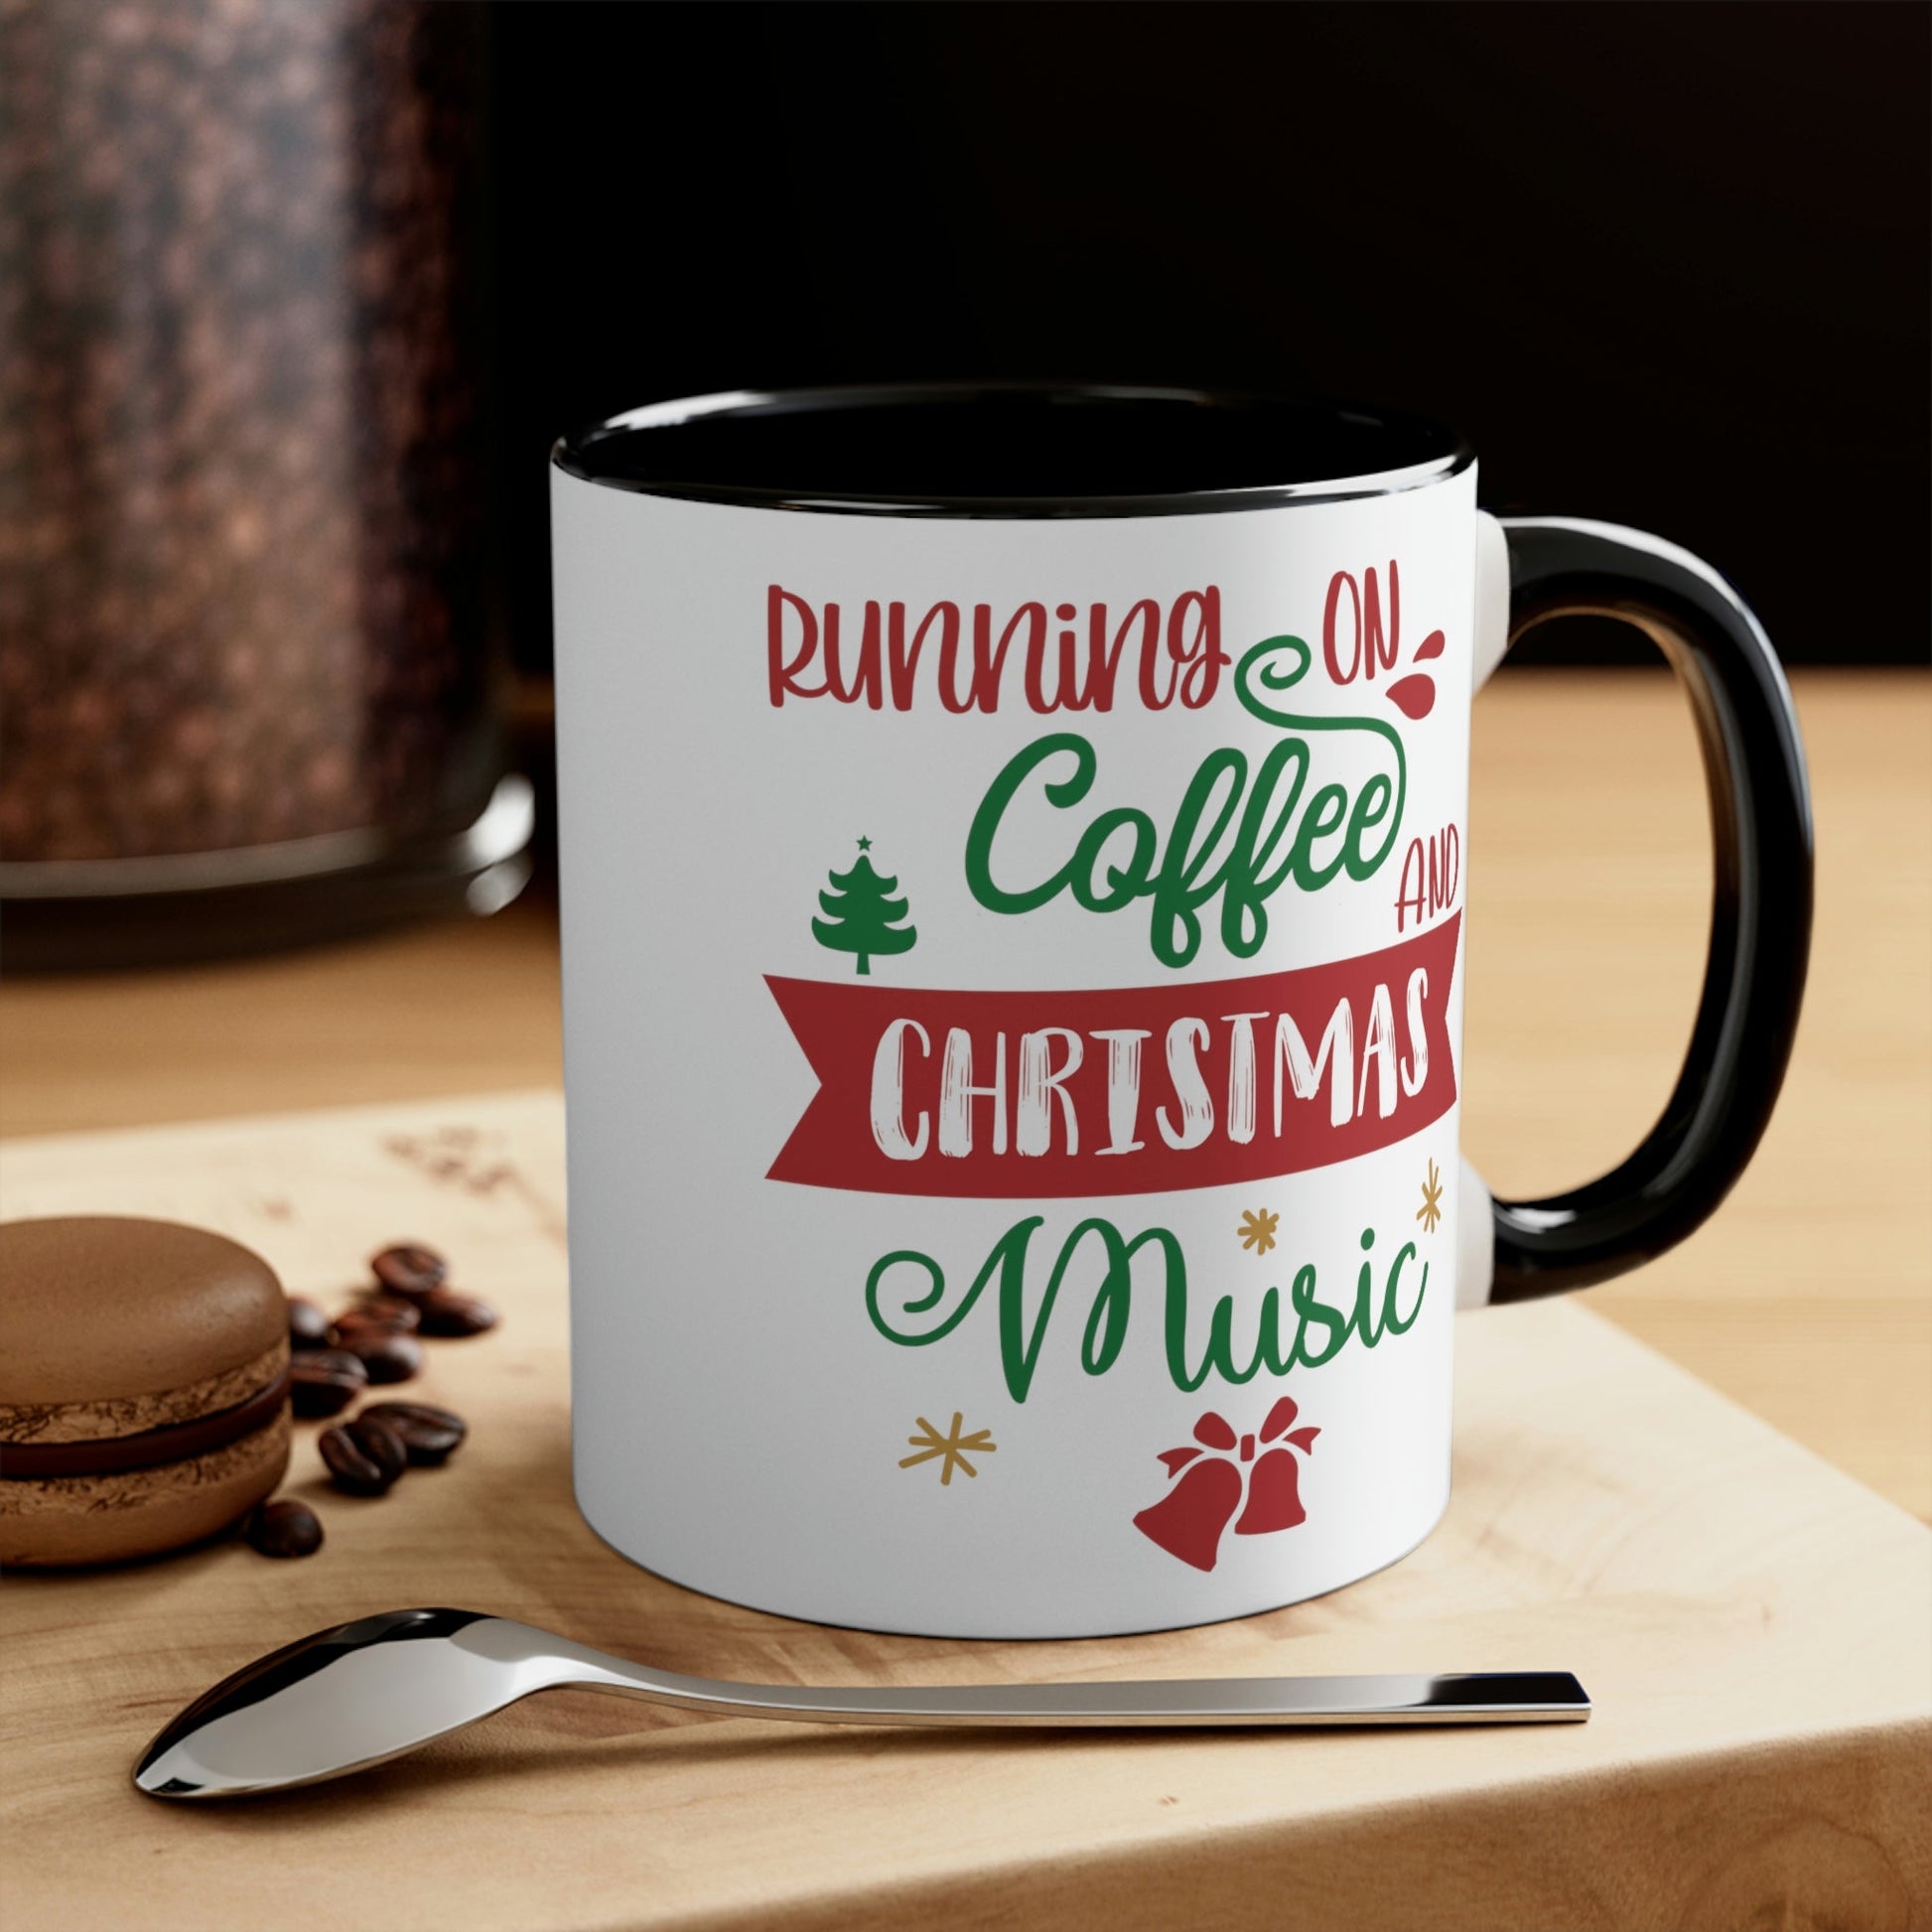 Running On Coffee And Christmas Quotes Music Wishes Classic Accent Coffee Mug 11oz Ichaku [Perfect Gifts Selection]